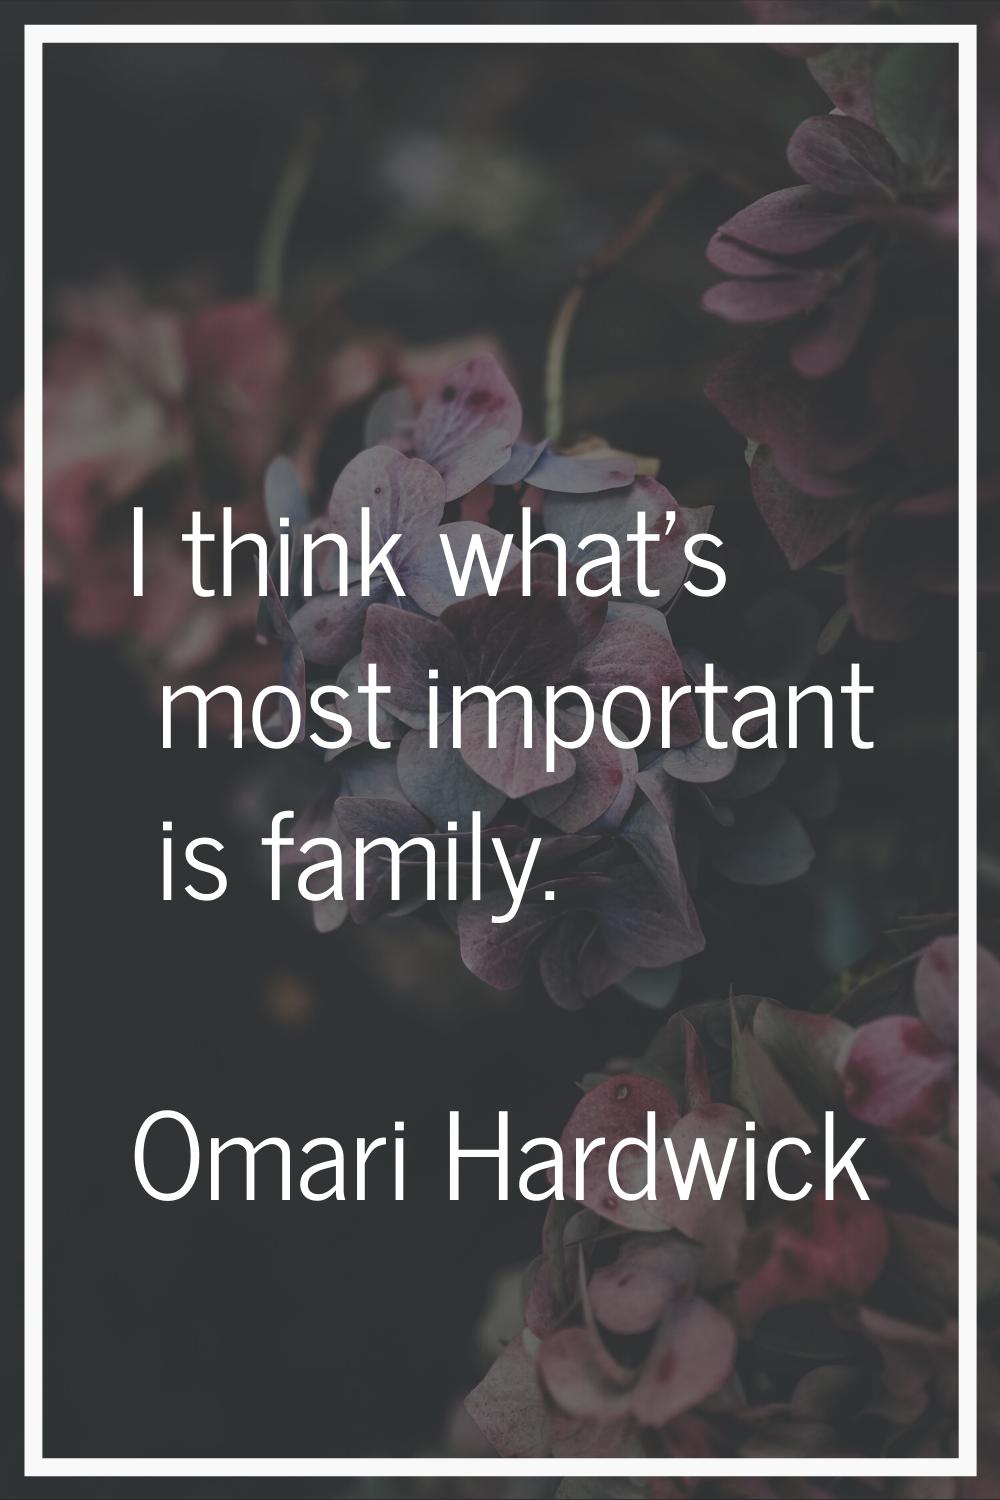 I think what's most important is family.